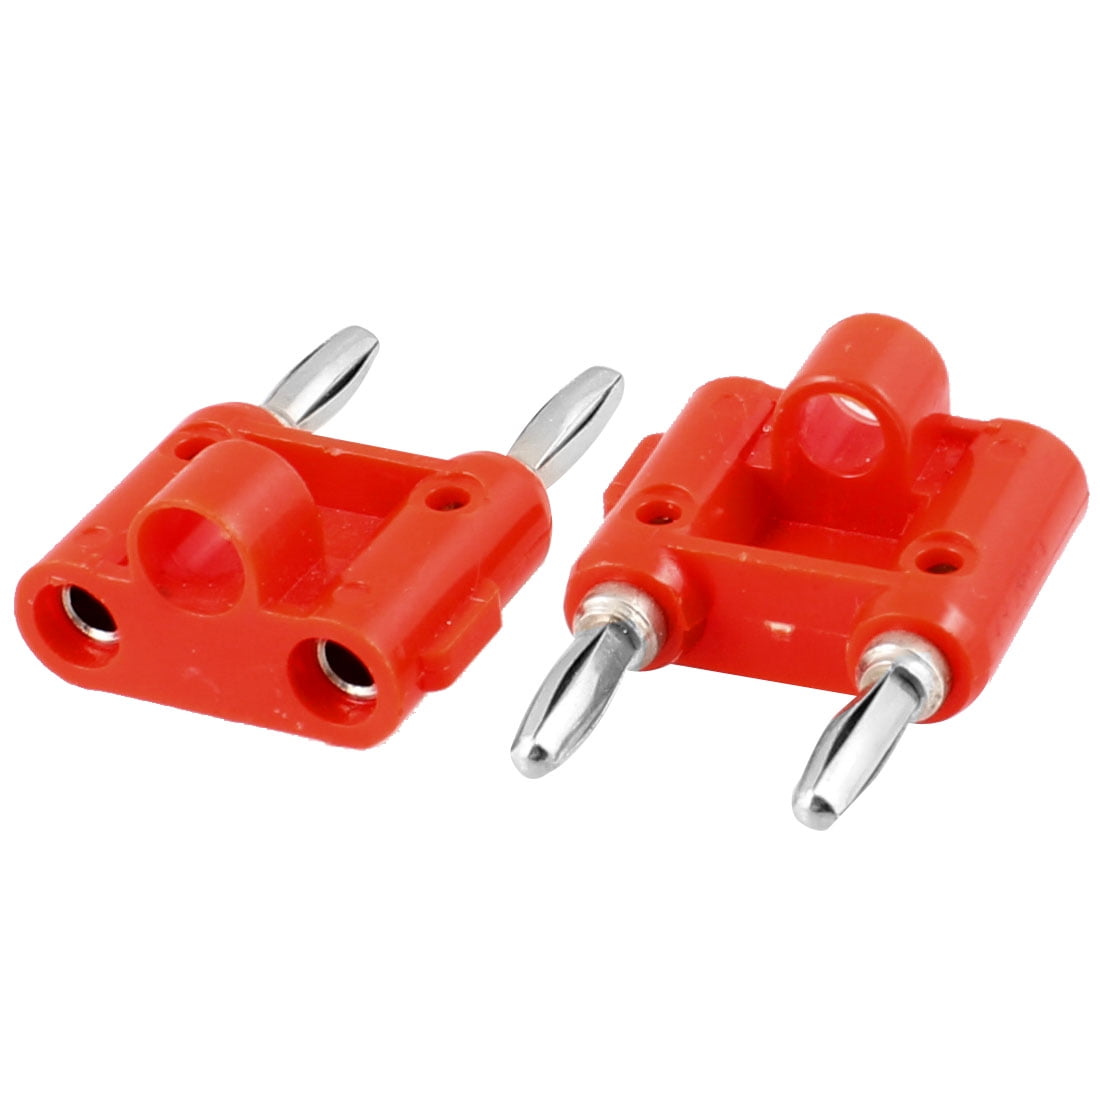 Speaker Wire Cable Dual Port Banana Jack Plug Connector Adapter 4mm 2 Pcs